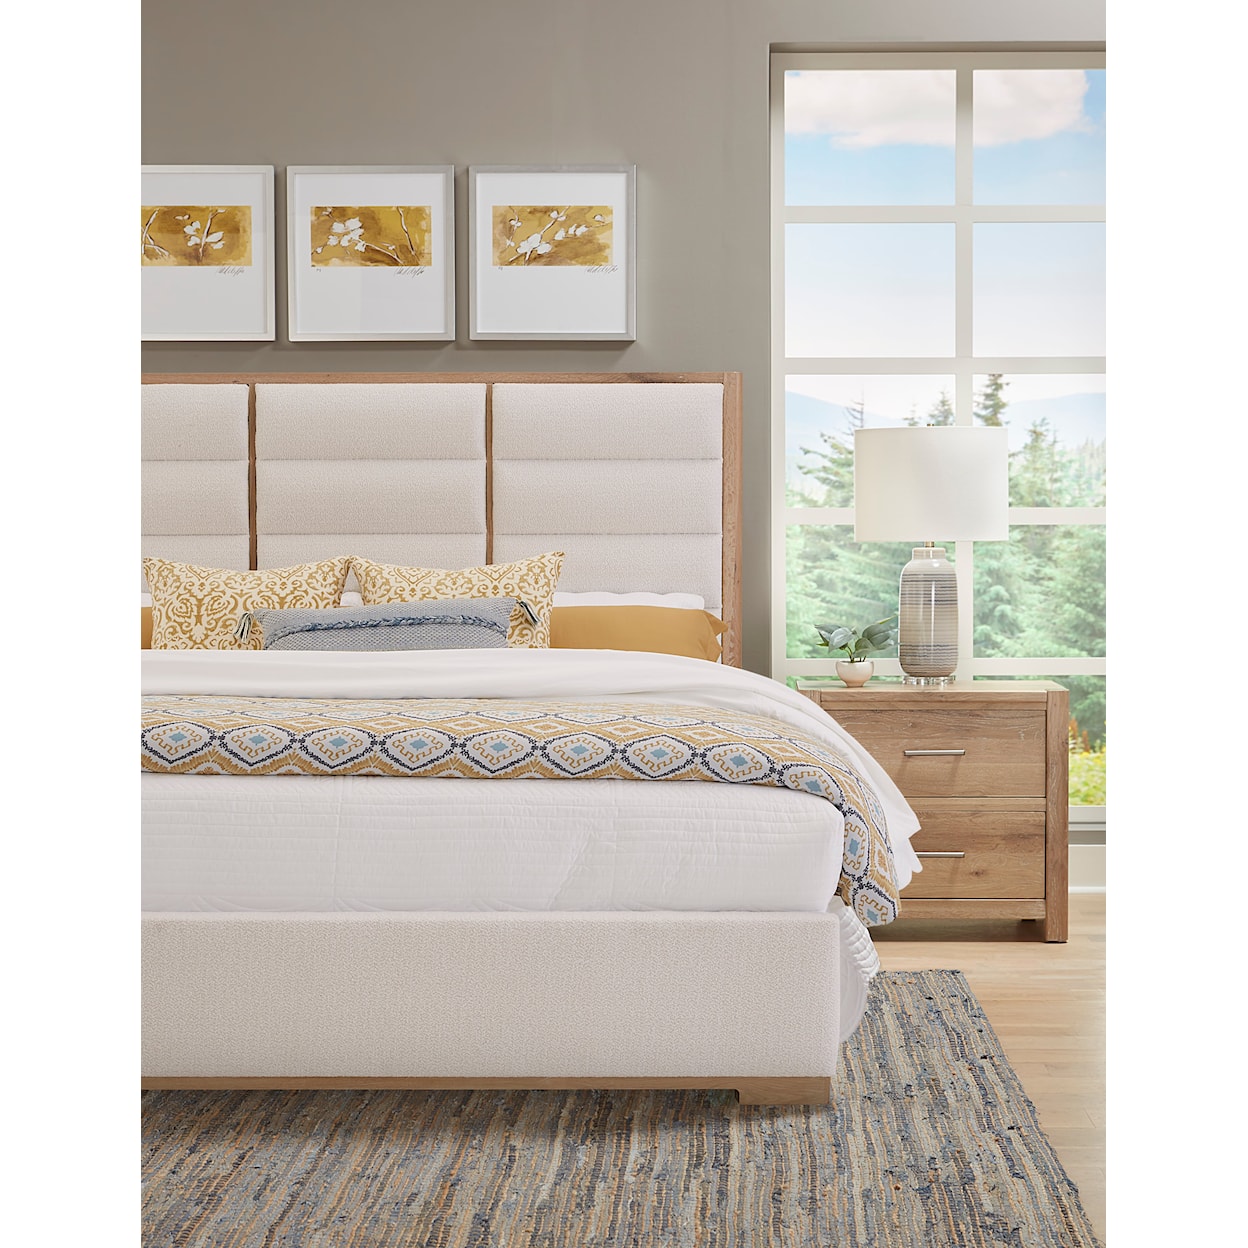 Vaughan Bassett Crafted Oak - Bleached White Upholstered King Panel Bed